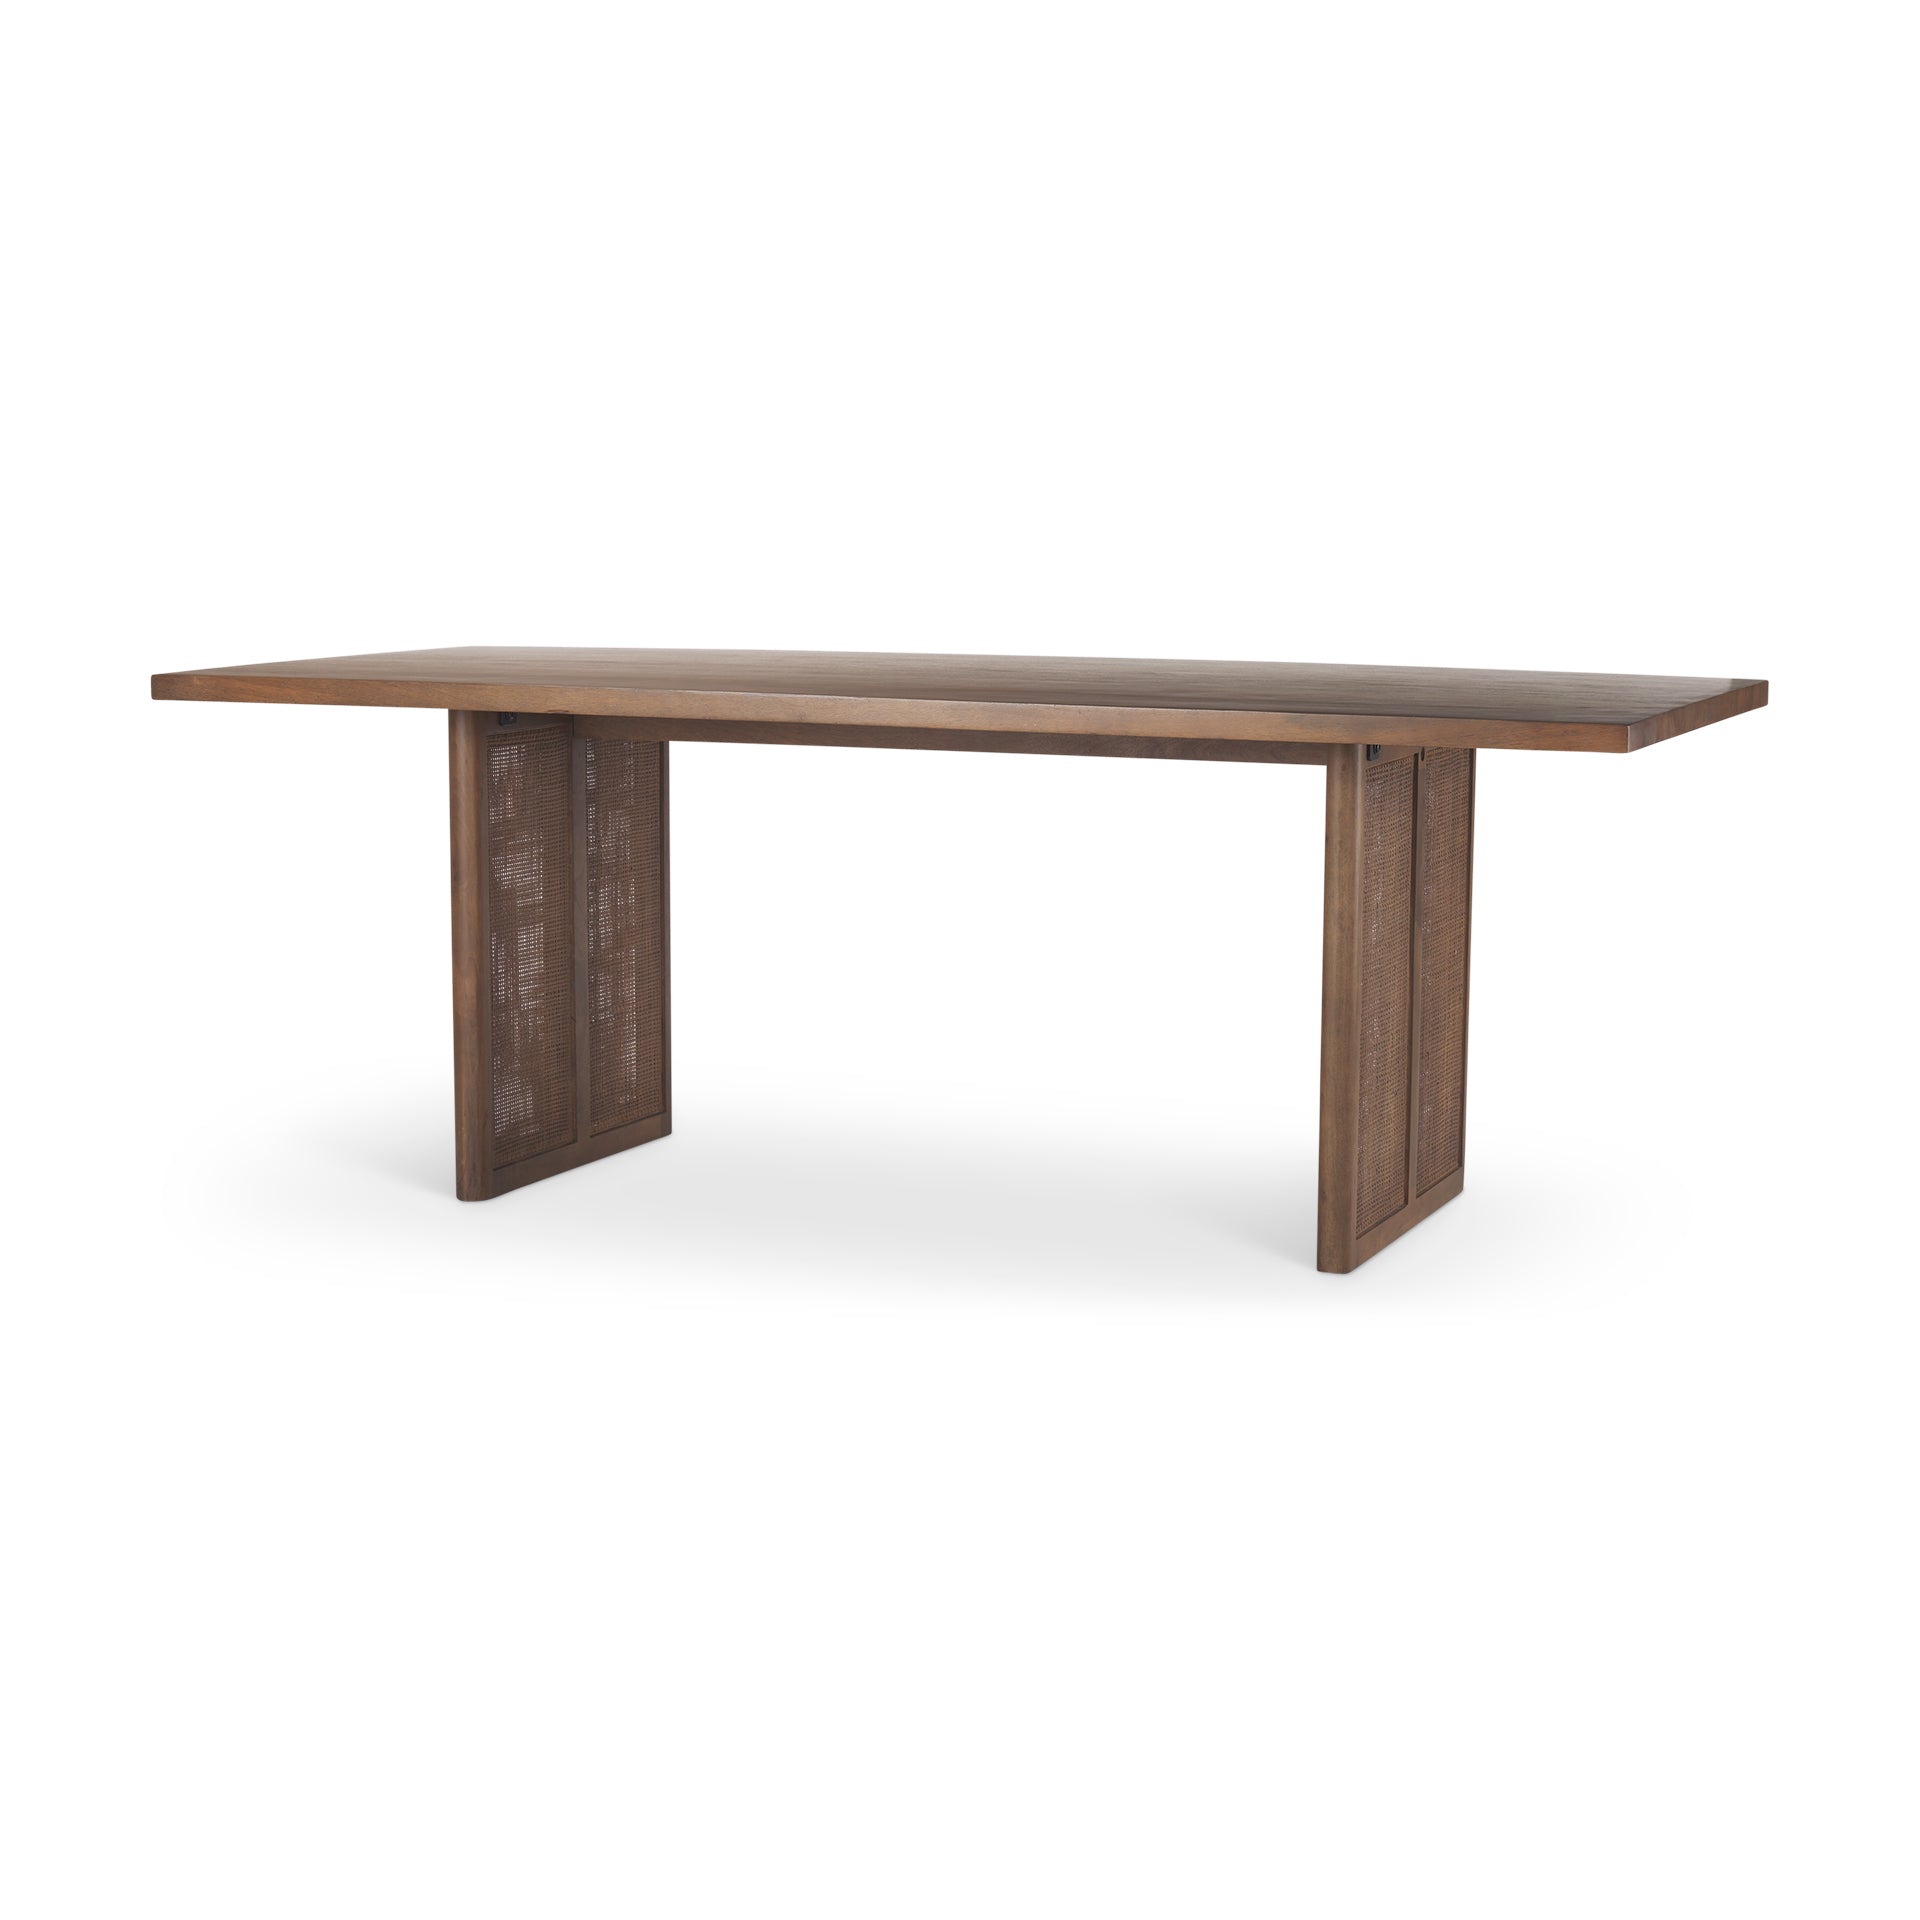 GRIER DINING TABLE - MEDIUM BROWN